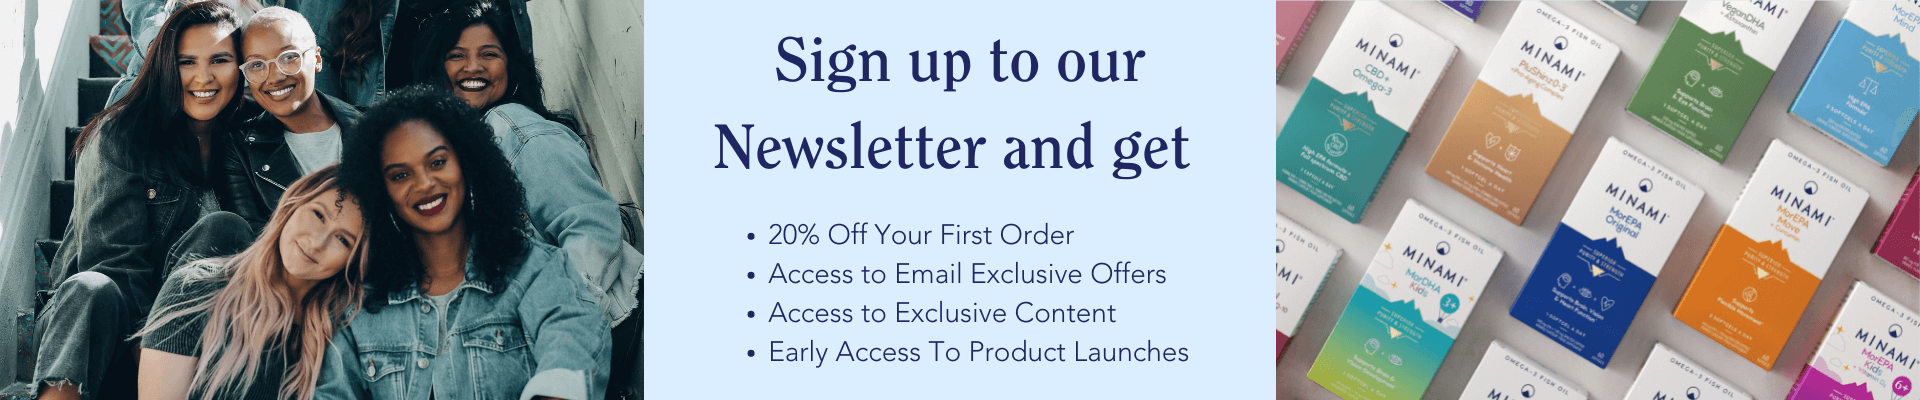 Sign up to our newsletter and get<br><br> 20% Off your first order<br>Exclusive newsletter offers<br>Early Access to new product launches